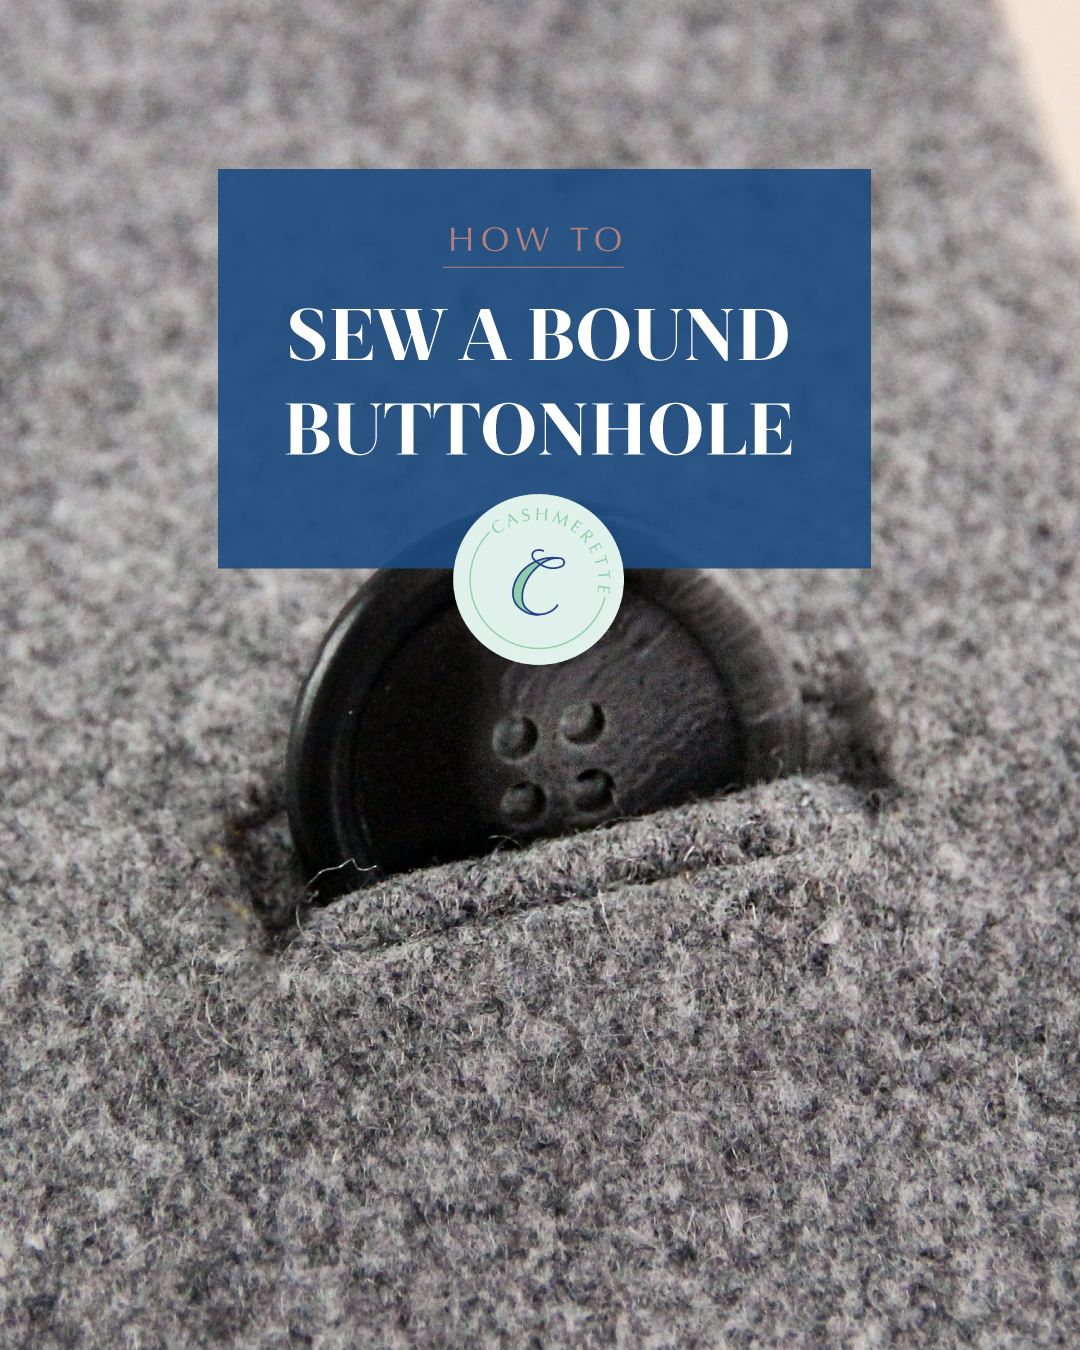 How to sew a bound buttonhole